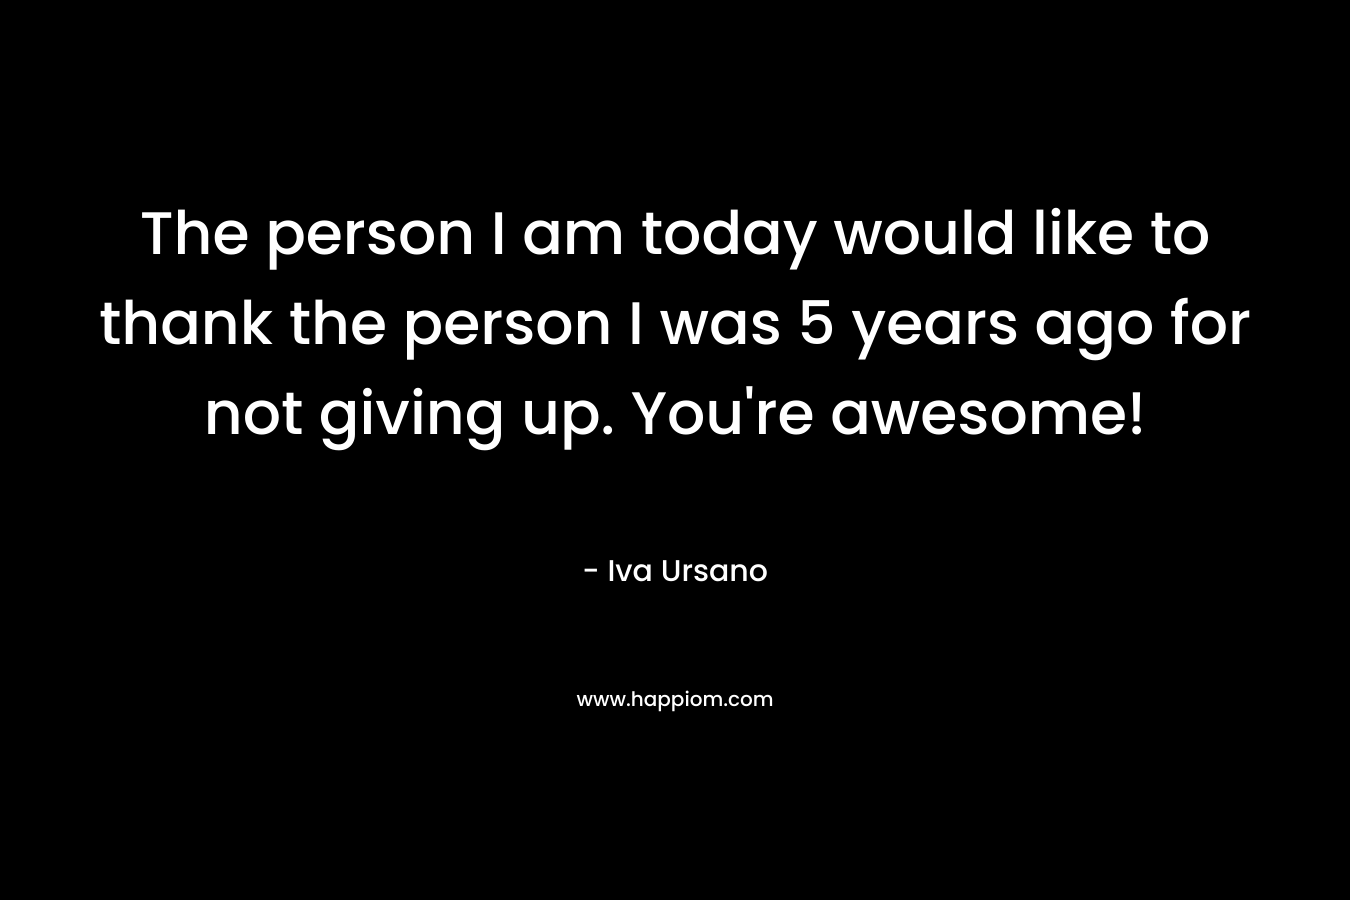 The person I am today would like to thank the person I was 5 years ago for not giving up. You’re awesome! – Iva Ursano